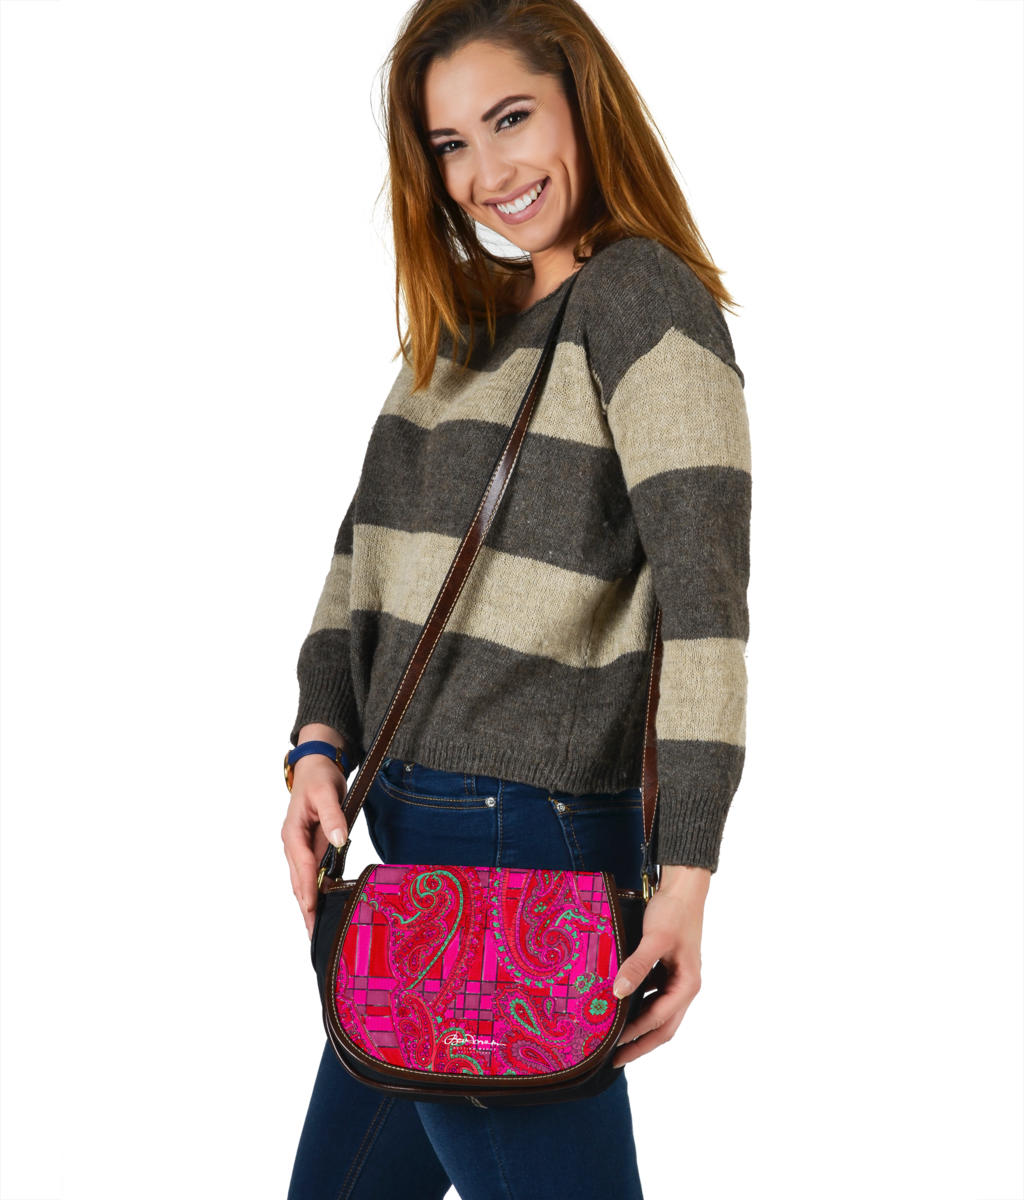 Bright Fuscia and Red Poppy Paisley on Plaid Saddle Shoulder Bag